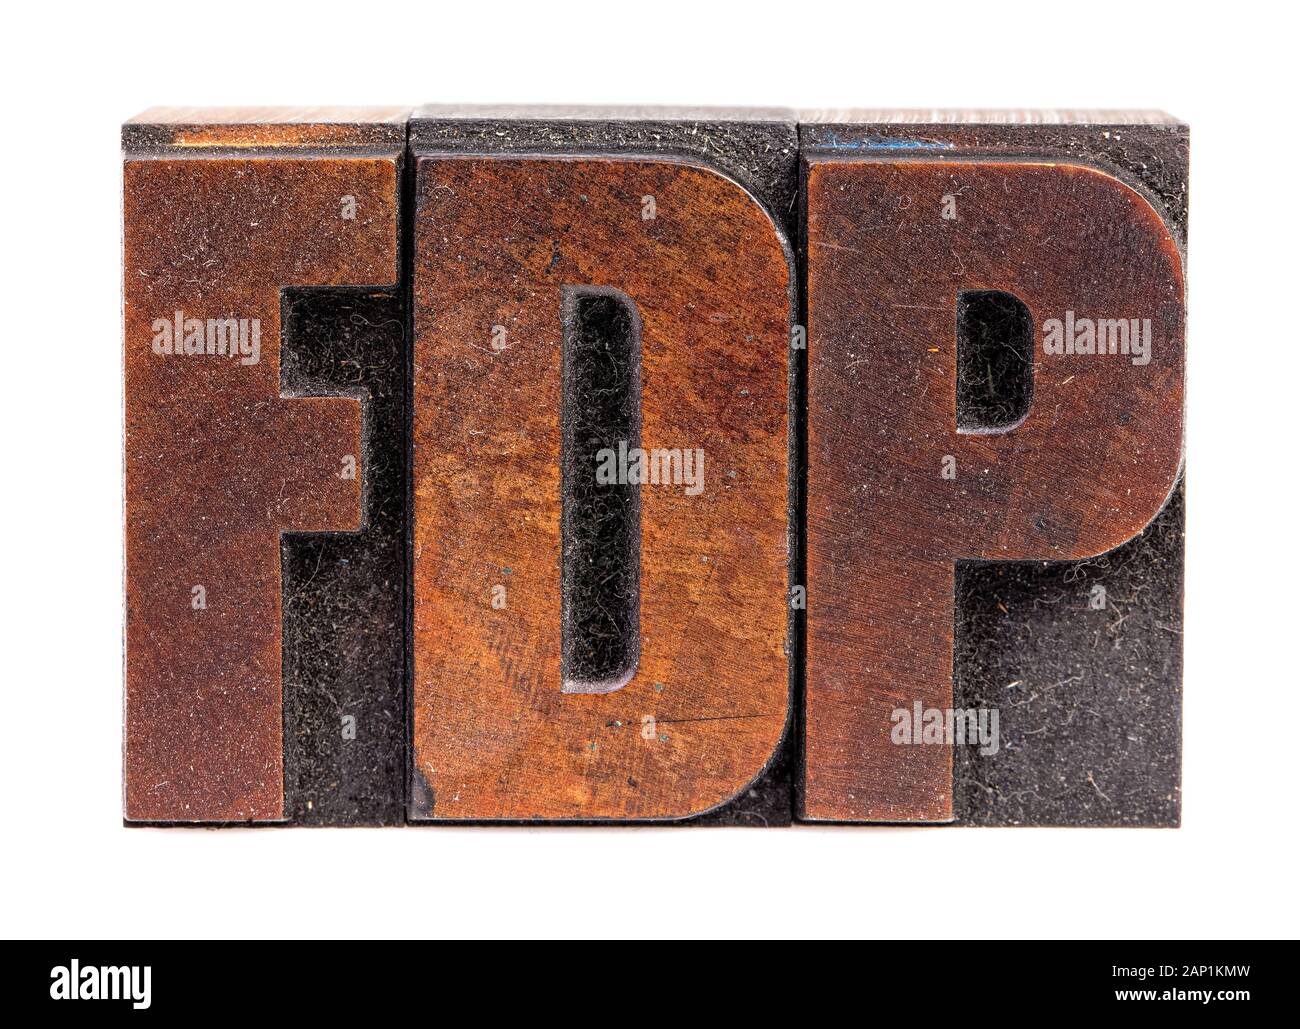 Wooden book printing letters, FDP, Free Democratic Party Stock Photo